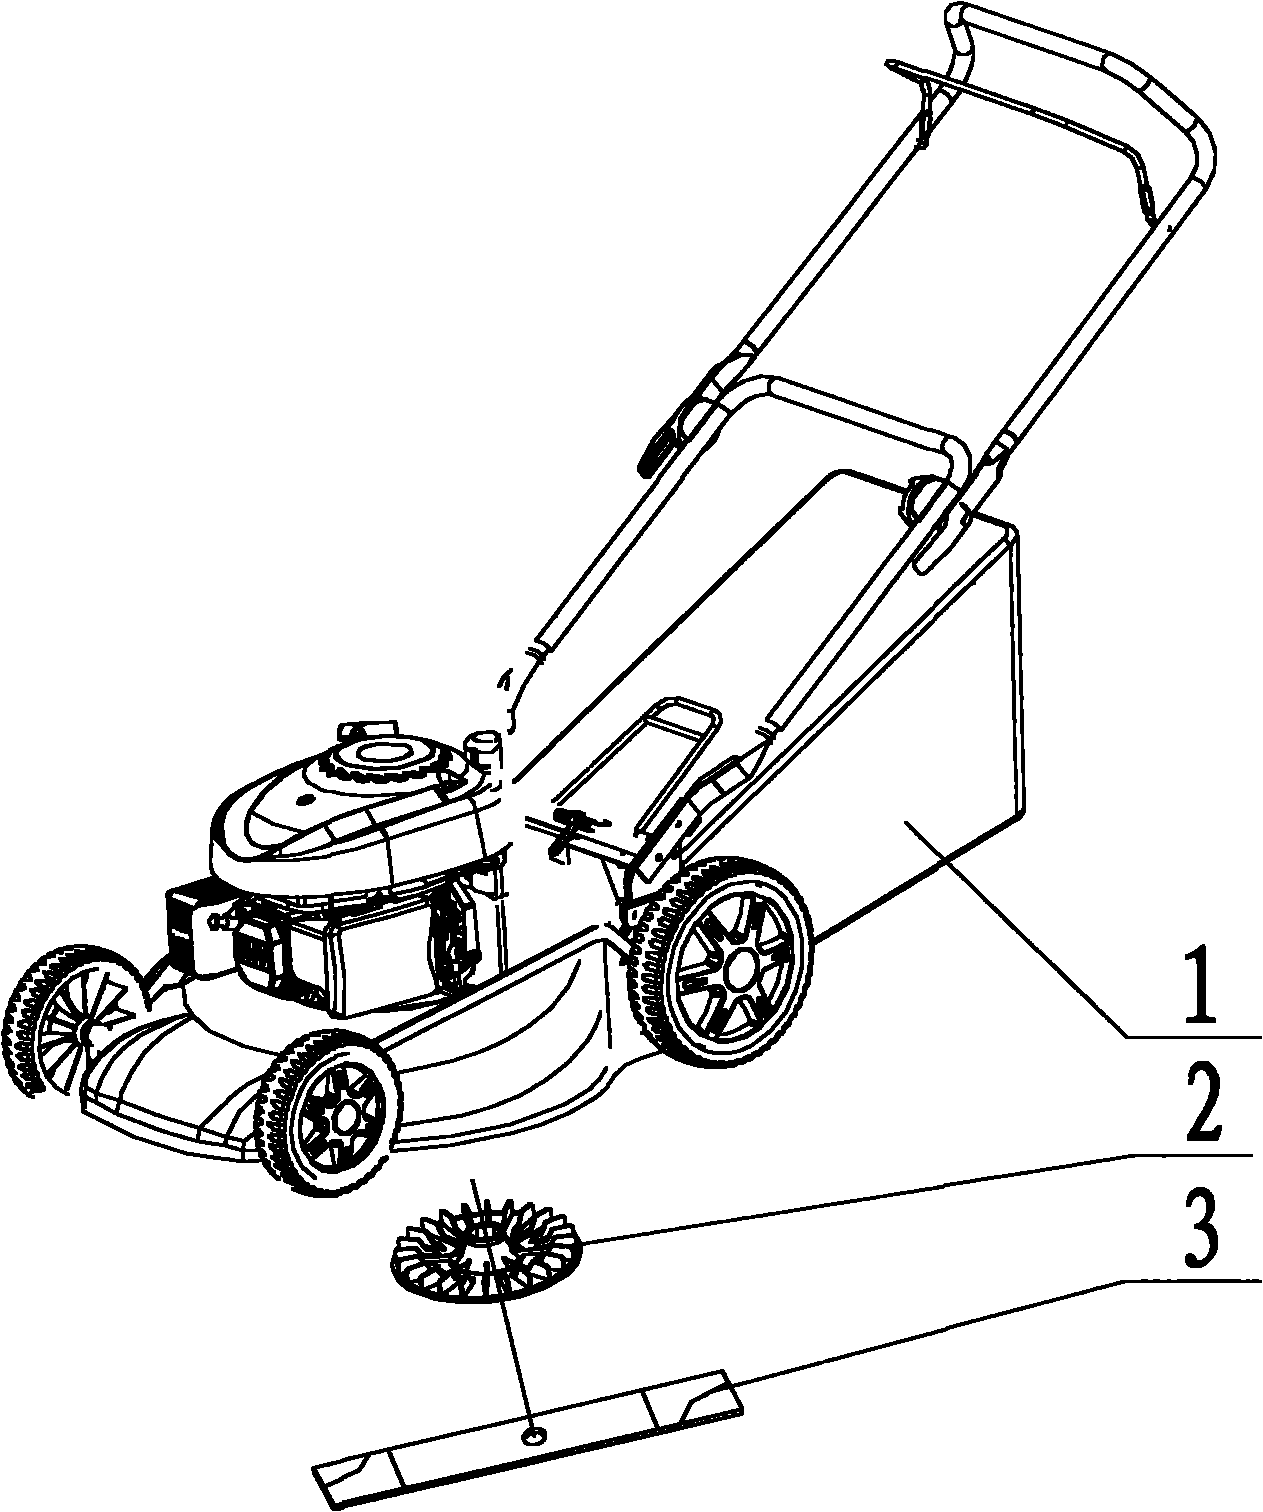 Straw-collecting device of mowing machine